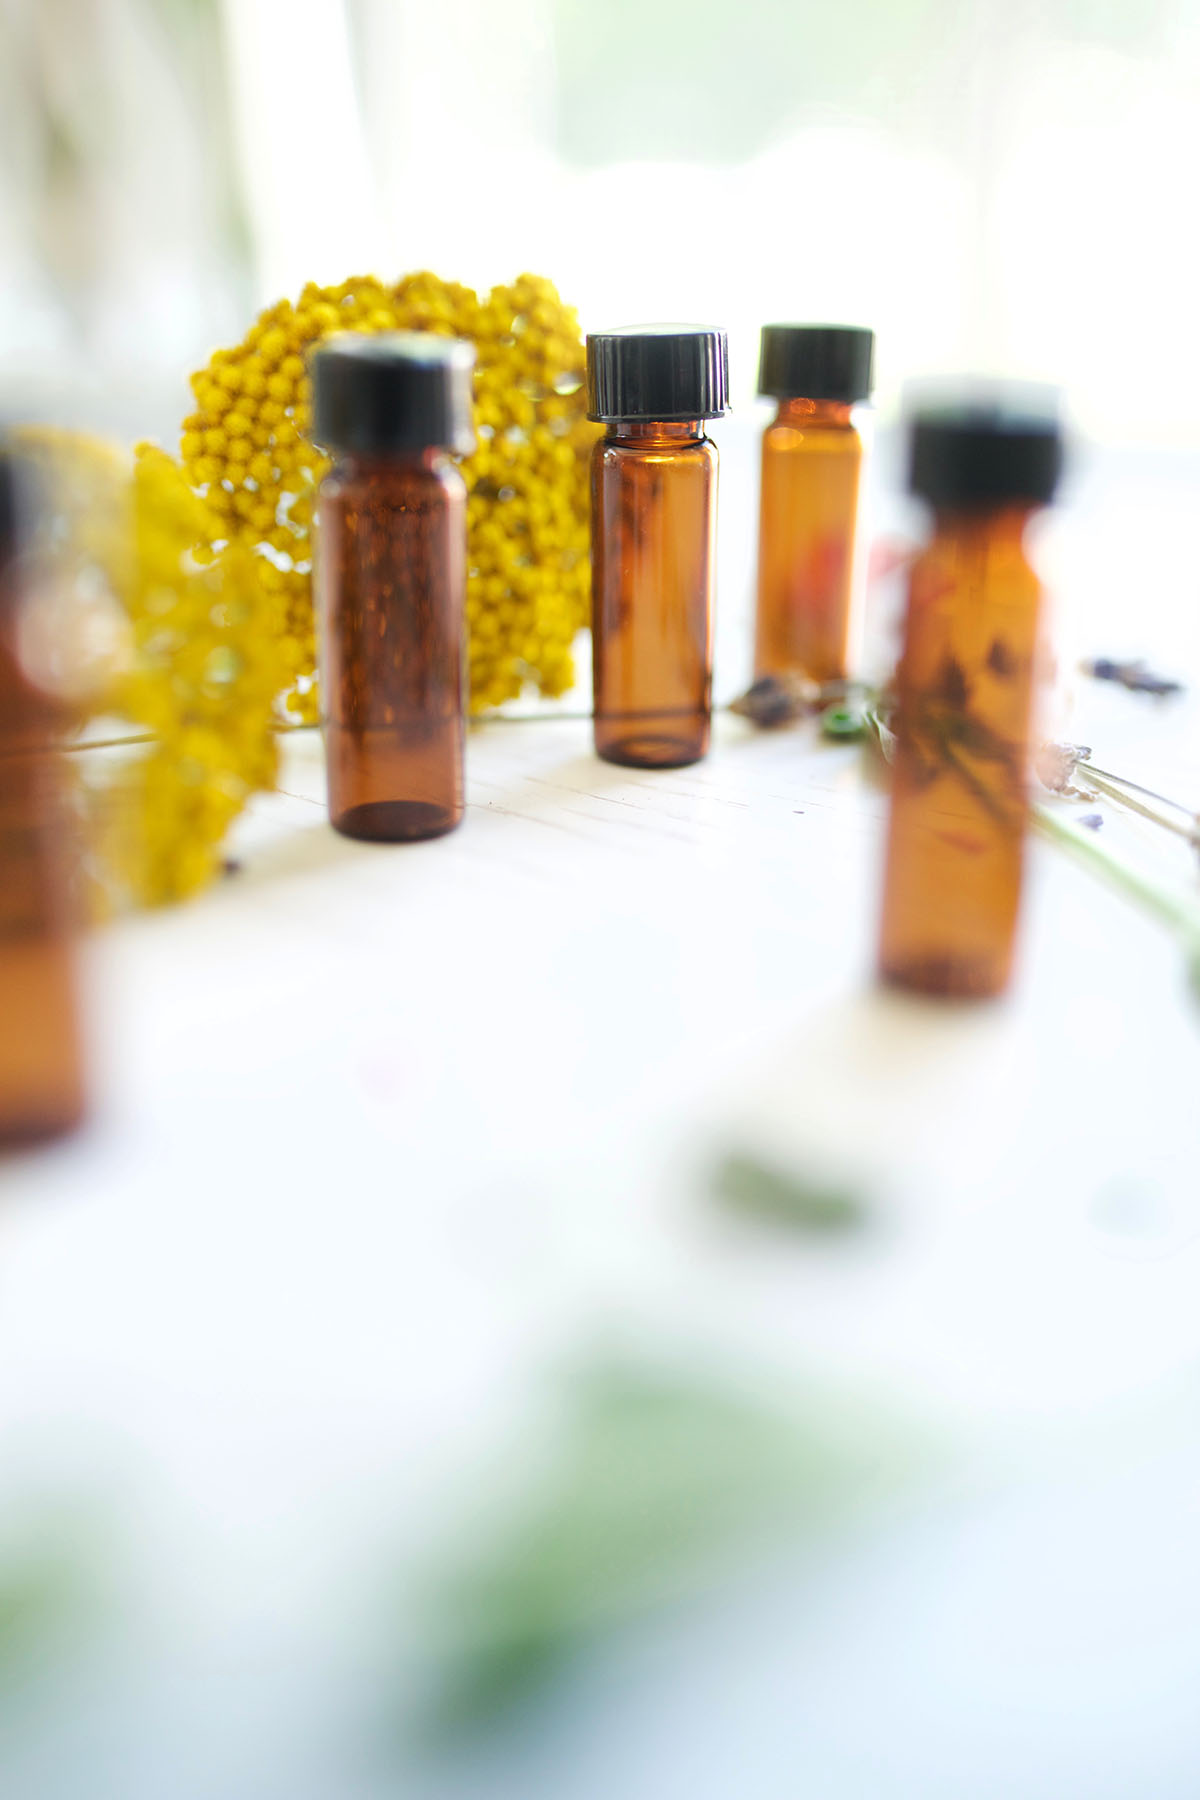 The Ultimate Essential Oils Guide | Herbal Academy | We have designed this Ultimate Essential Oils Guide to help you navigate through some of the very important topics and issues in aromatherapy that we've written about on the Herbal Academy blog. Our goal is to continually update this post with new articles and information so it can be a valuable resource for you.